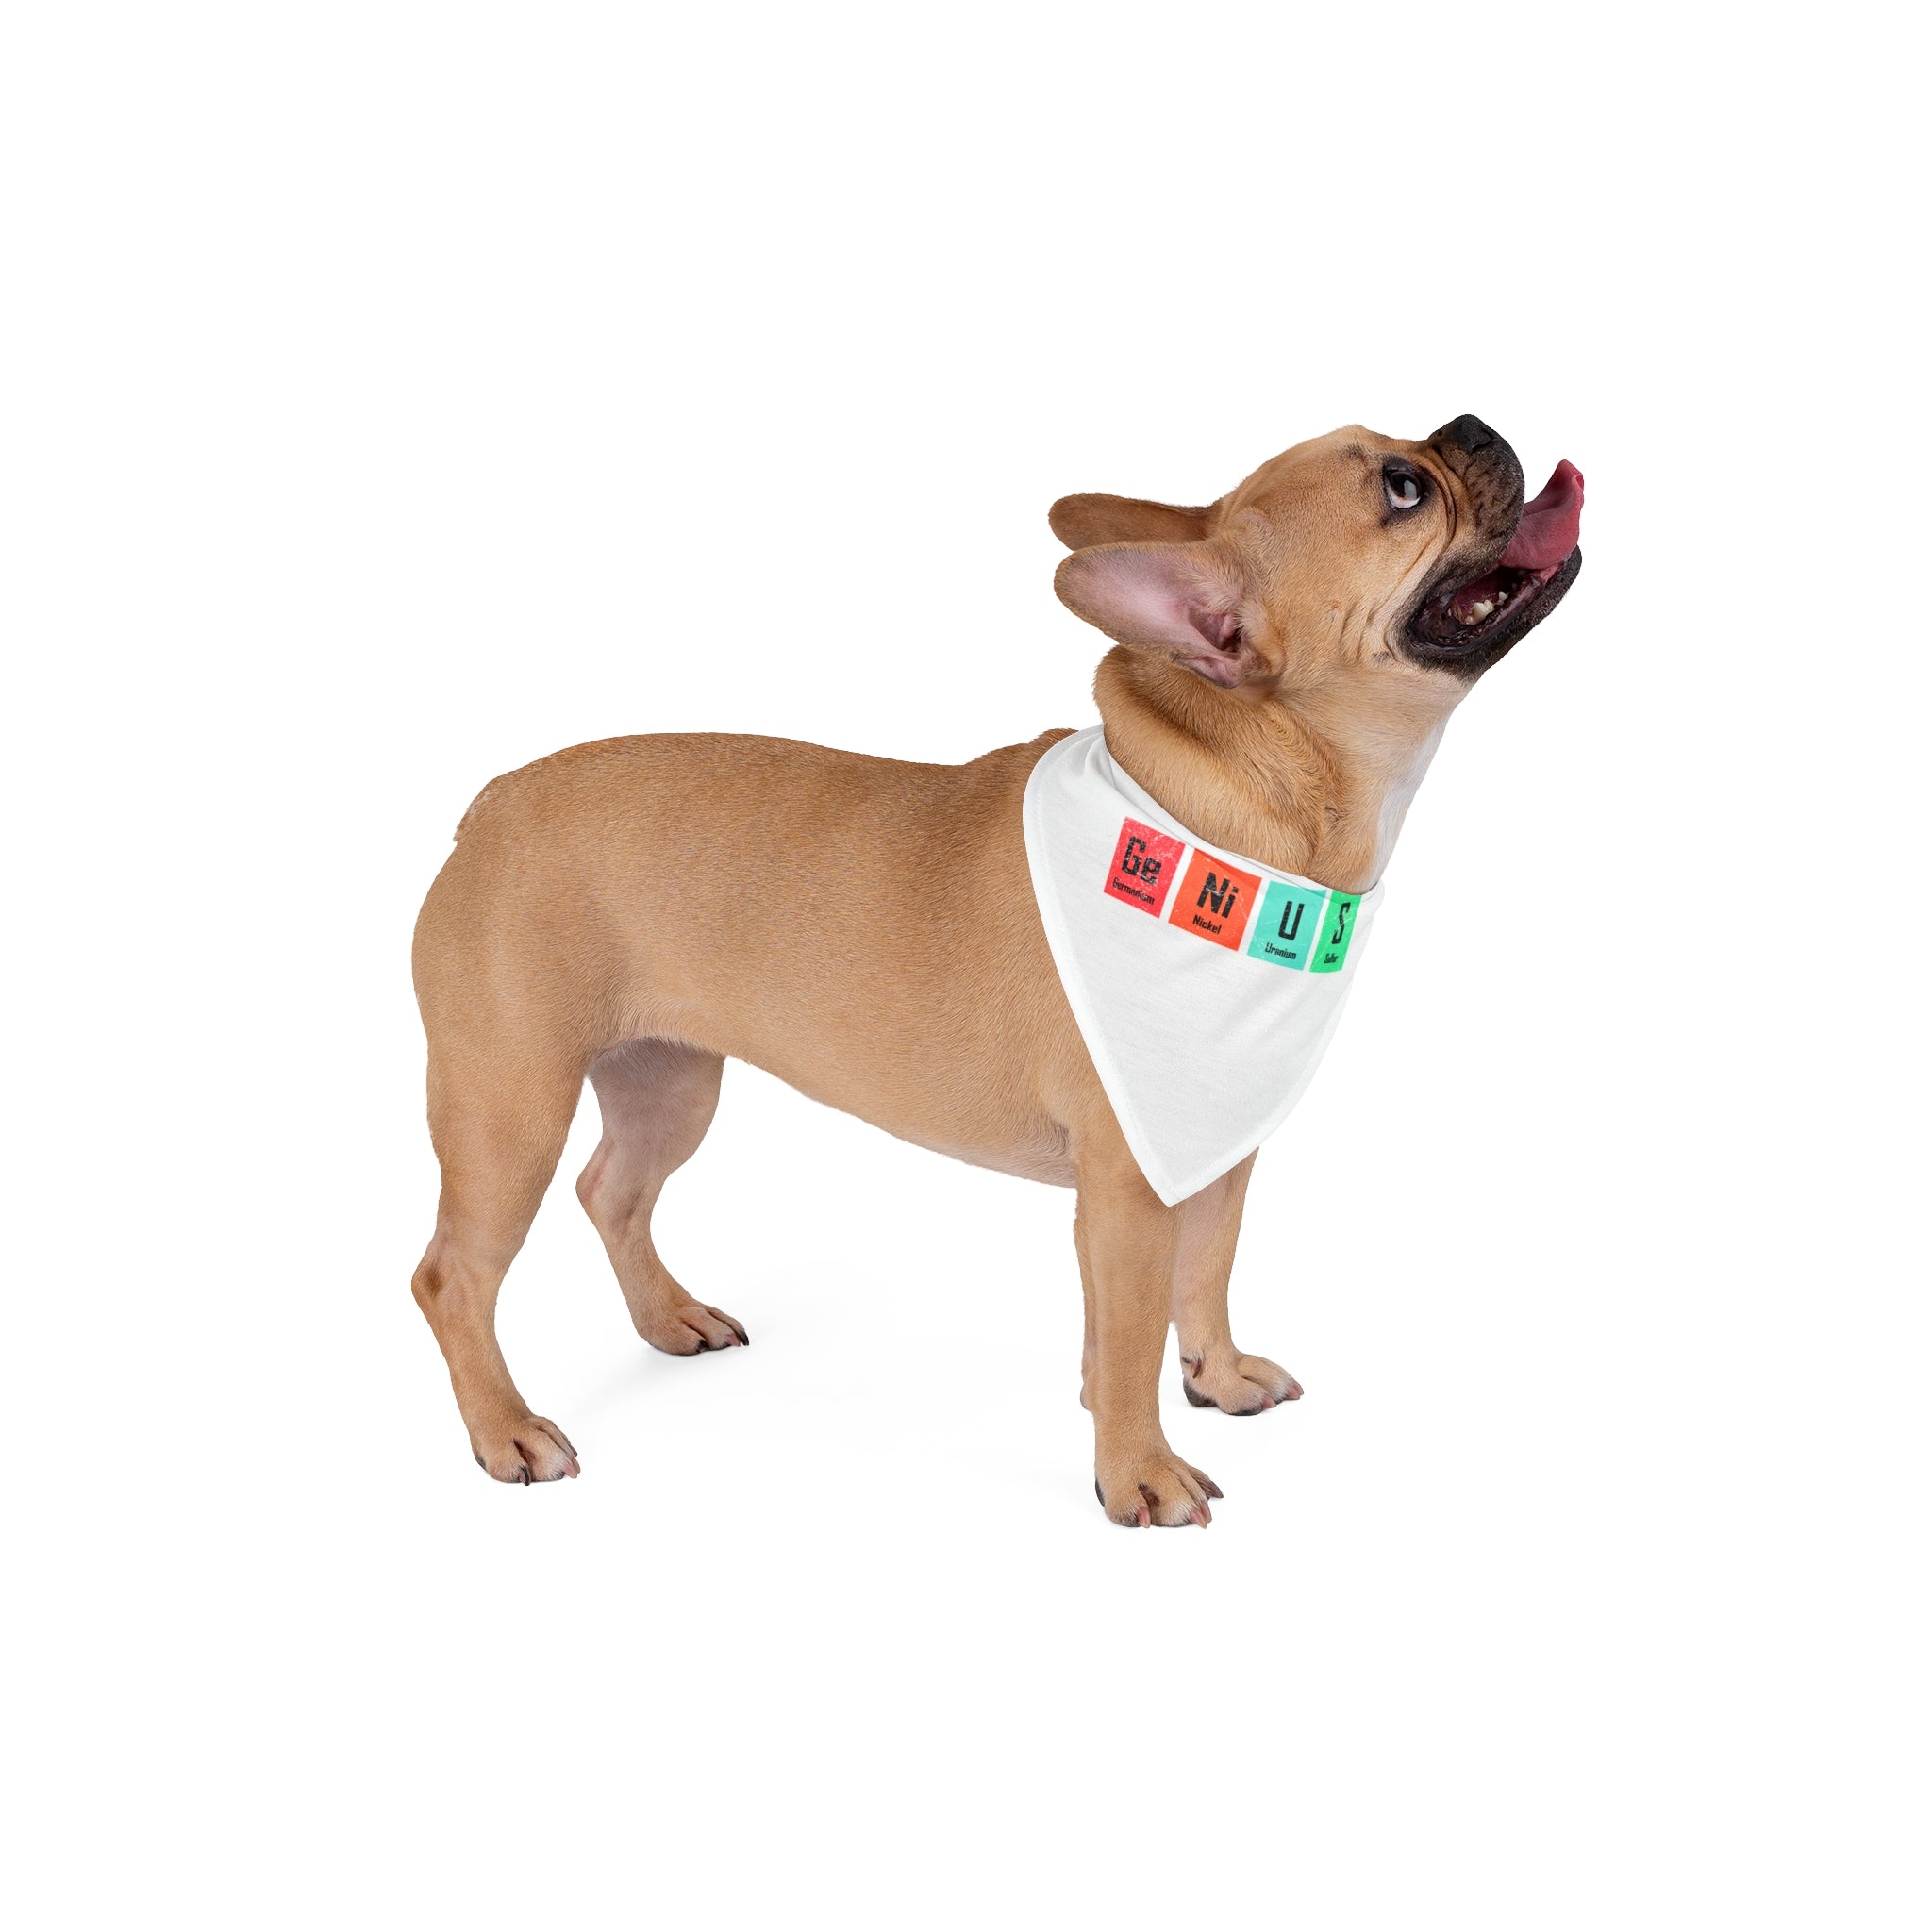 A brown French Bulldog wearing a Ge-Ni-U-S - Pet Bandana stands on a white background. The polyester bandana adds a touch of cheer, perfect for design-loving pets. The dog looks upward with its tongue out.